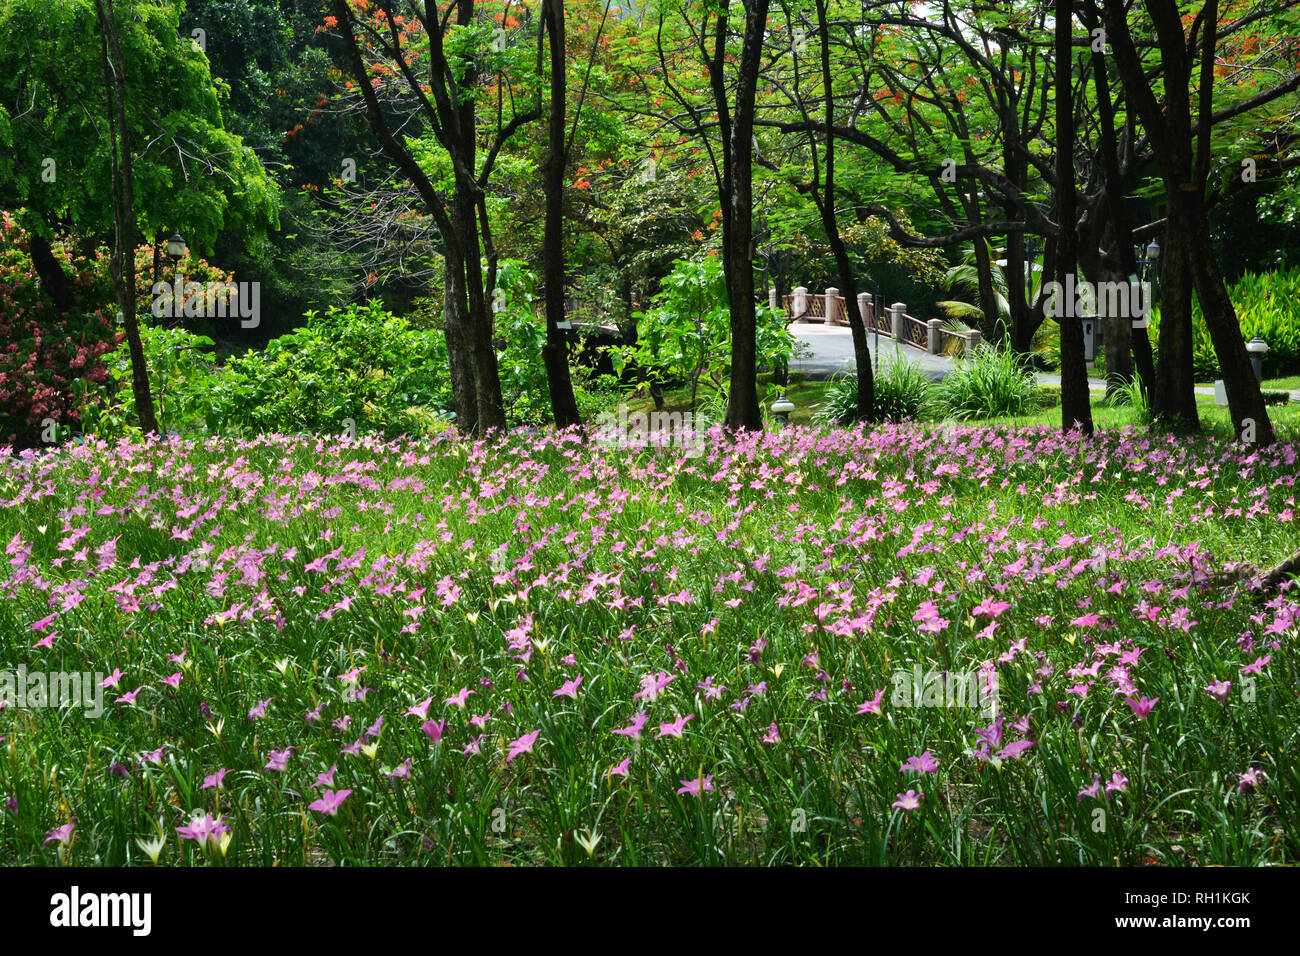 Zephyranthes Lily or Rain Lily in Queen Sirikit park, Bangkok, Thailand. Stock Photo